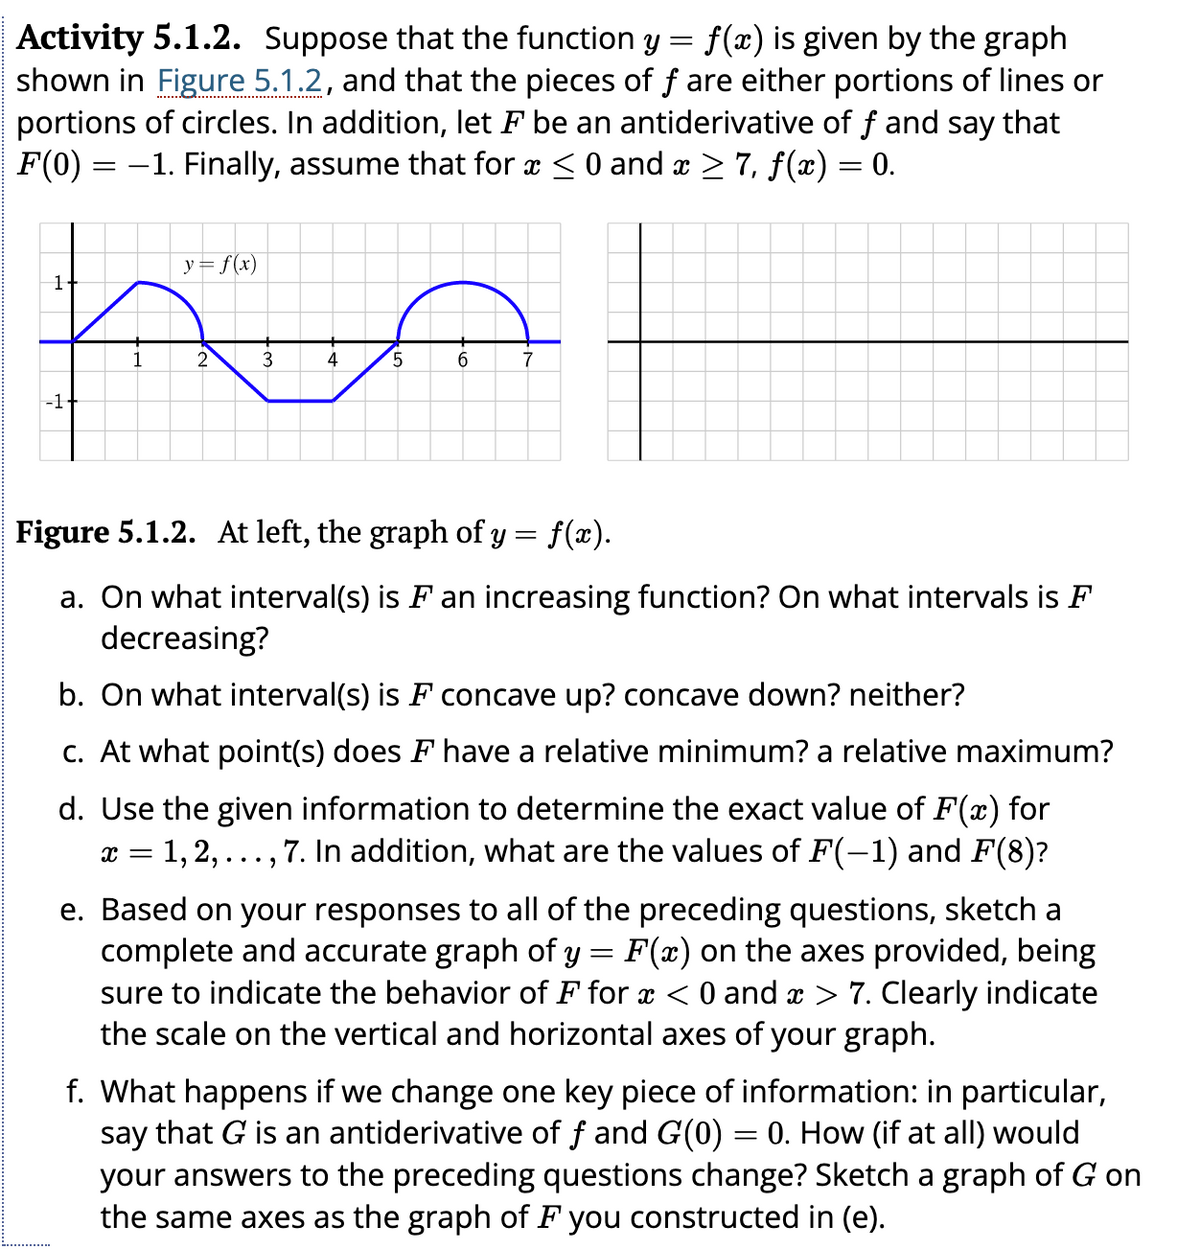 Activity 5.1.2. Suppose that the function y = f(x) is given by the graph
shown in Figure 5.1.2, and that the pieces of f are either portions of lines or
portions of circles. In addition, let F be an antiderivative of f and say that
F(0) = -1. Finally, assume that for x ≤ 0 and x ≥ 7, ƒ(x) = 0.
1
-1+
y = f(x)
2
3
4
5
6
7
Figure 5.1.2. At left, the graph of y = f(x).
a. On what interval(s) is F an increasing function? On what intervals is F
decreasing?
b. On what interval(s) is F concave up? concave down? neither?
c. At what point(s) does F have a relative minimum? a relative maximum?
d. Use the given information to determine the exact value of F(x) for
x = 1, 2, ‚ 7. In addition, what are the values of F(−1) and F(8)?
..
"...
e. Based on your responses to all of the preceding questions, sketch a
complete and accurate graph of y = F(x) on the axes provided, being
sure to indicate the behavior of F for x < 0 and x > 7. Clearly indicate
the scale on the vertical and horizontal axes of your graph.
f. What happens if we change one key piece of information: in particular,
say that G is an antiderivative of ƒ and G(0) = 0. How (if at all) would
your answers to the preceding questions change? Sketch a graph of G on
the same axes as the graph of F you constructed in (e).